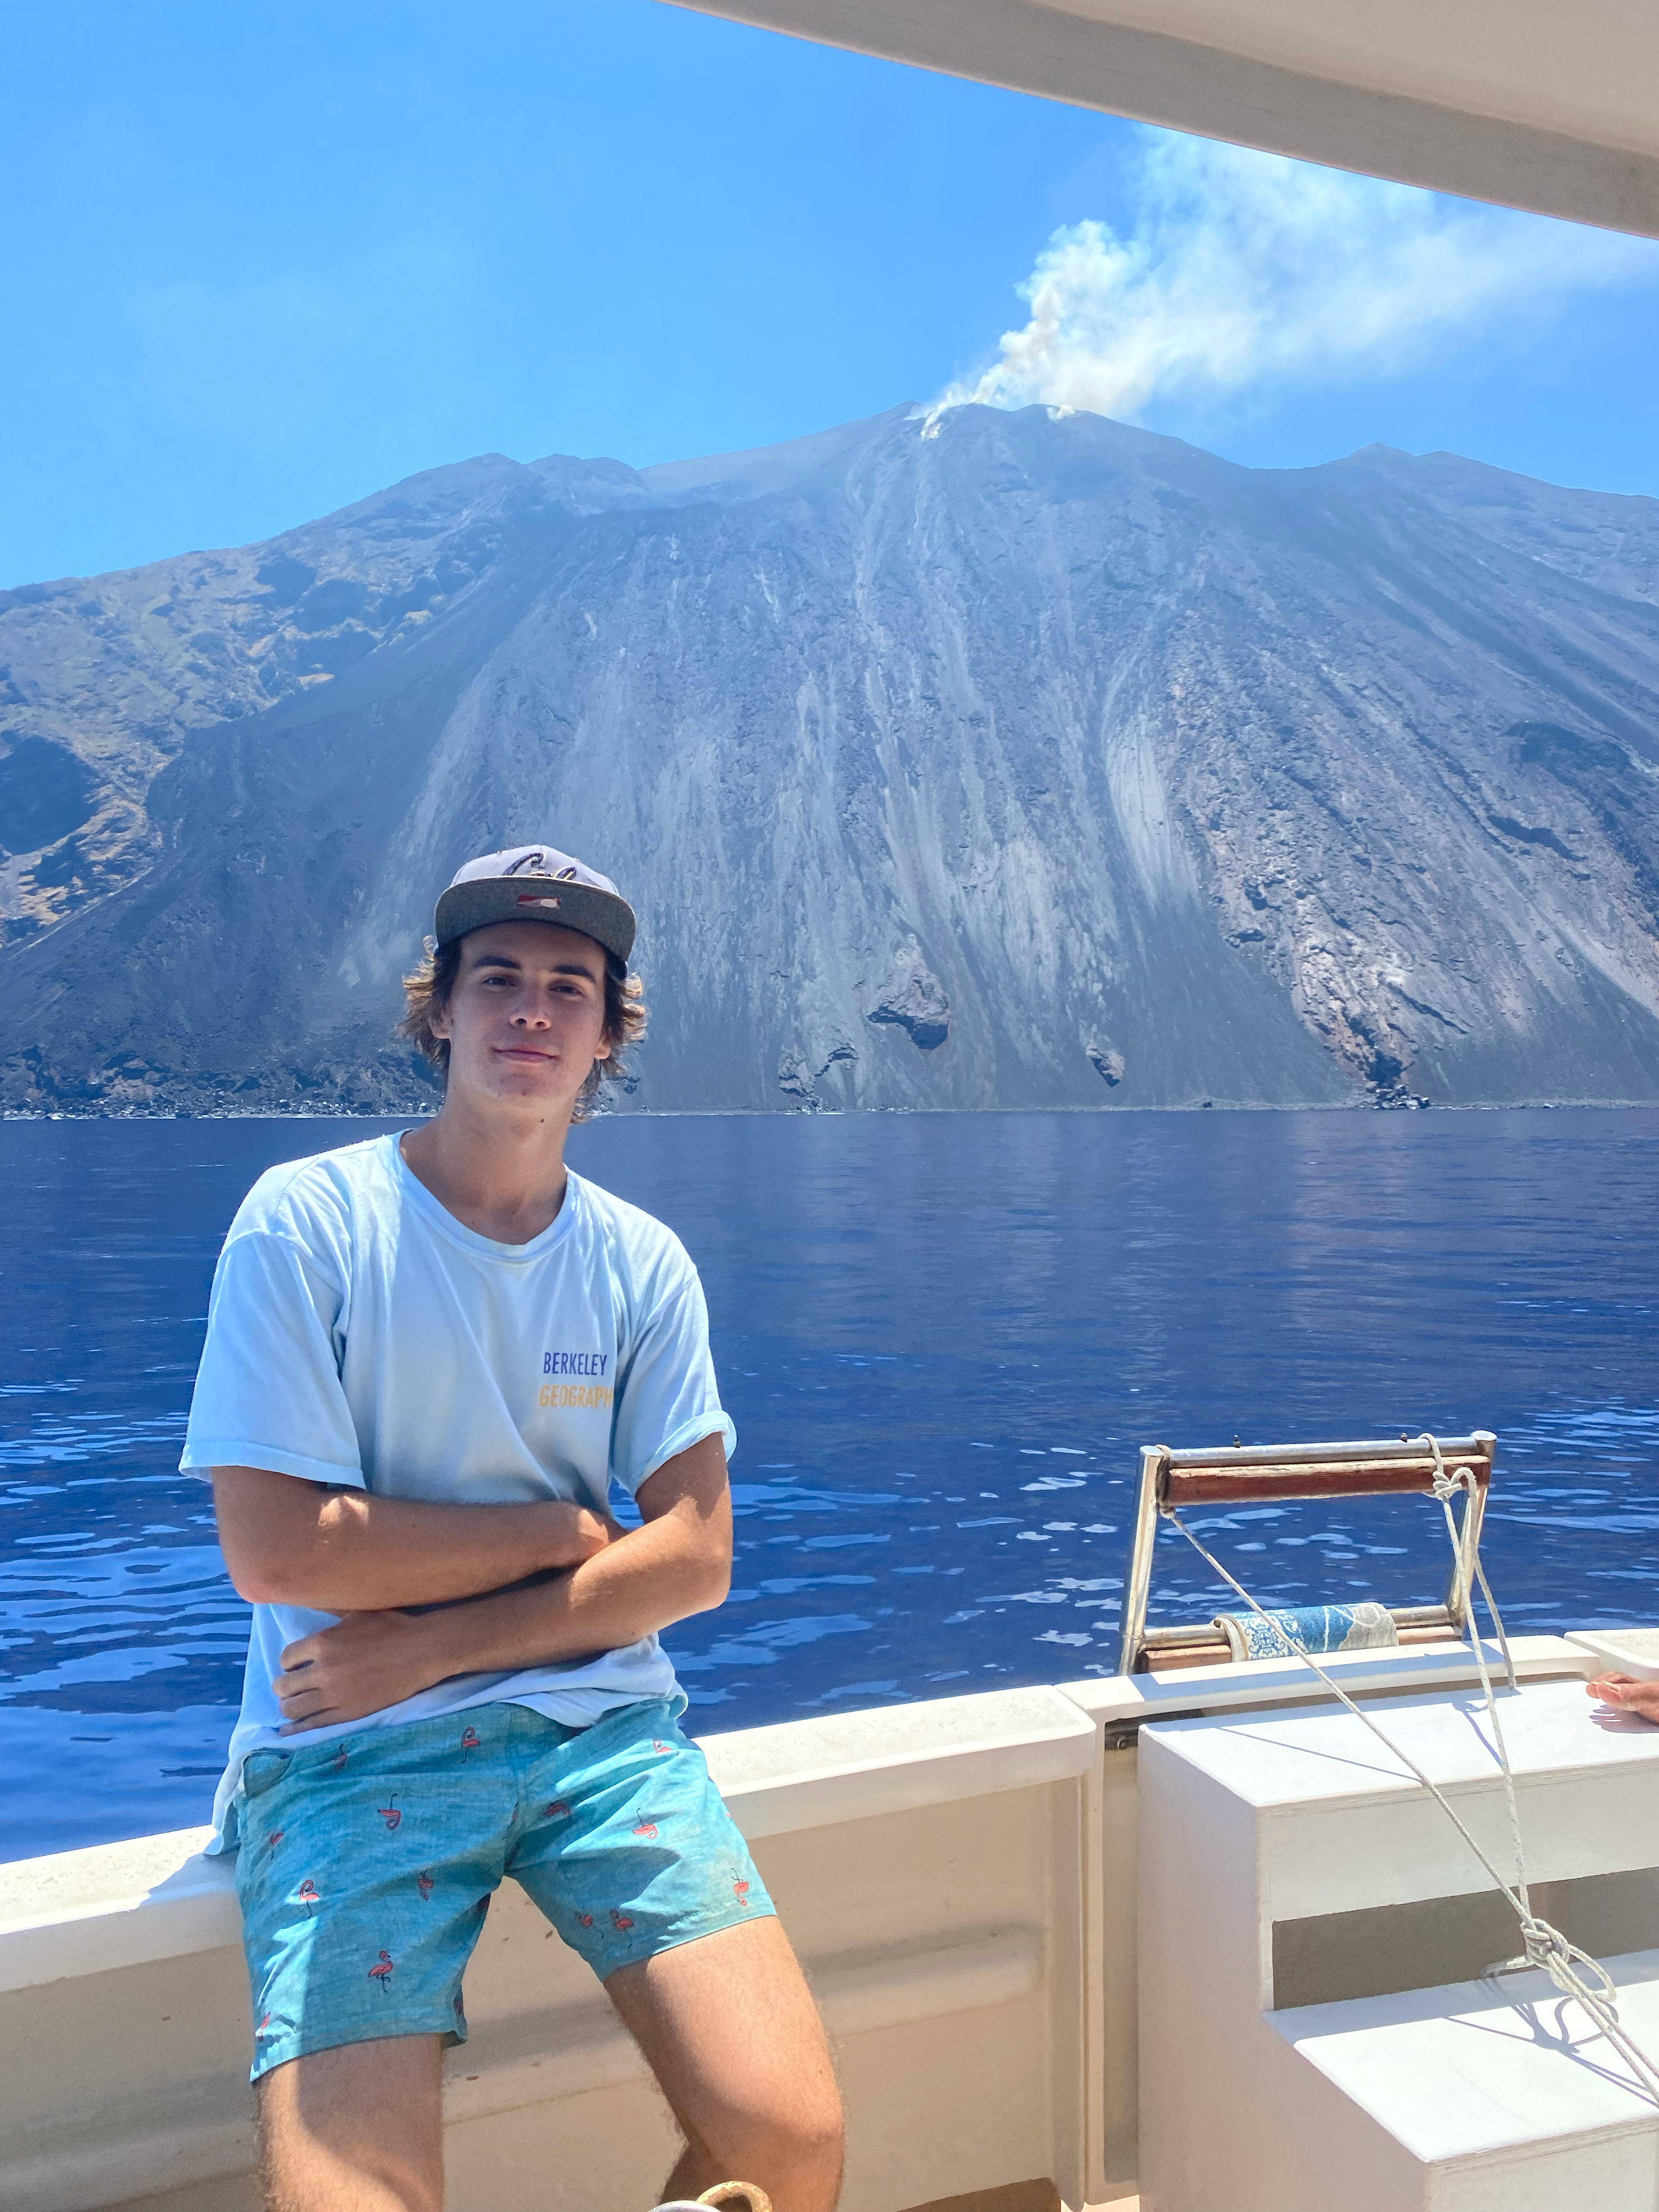 a student studying abroad in Sicily posing in front of a volcano